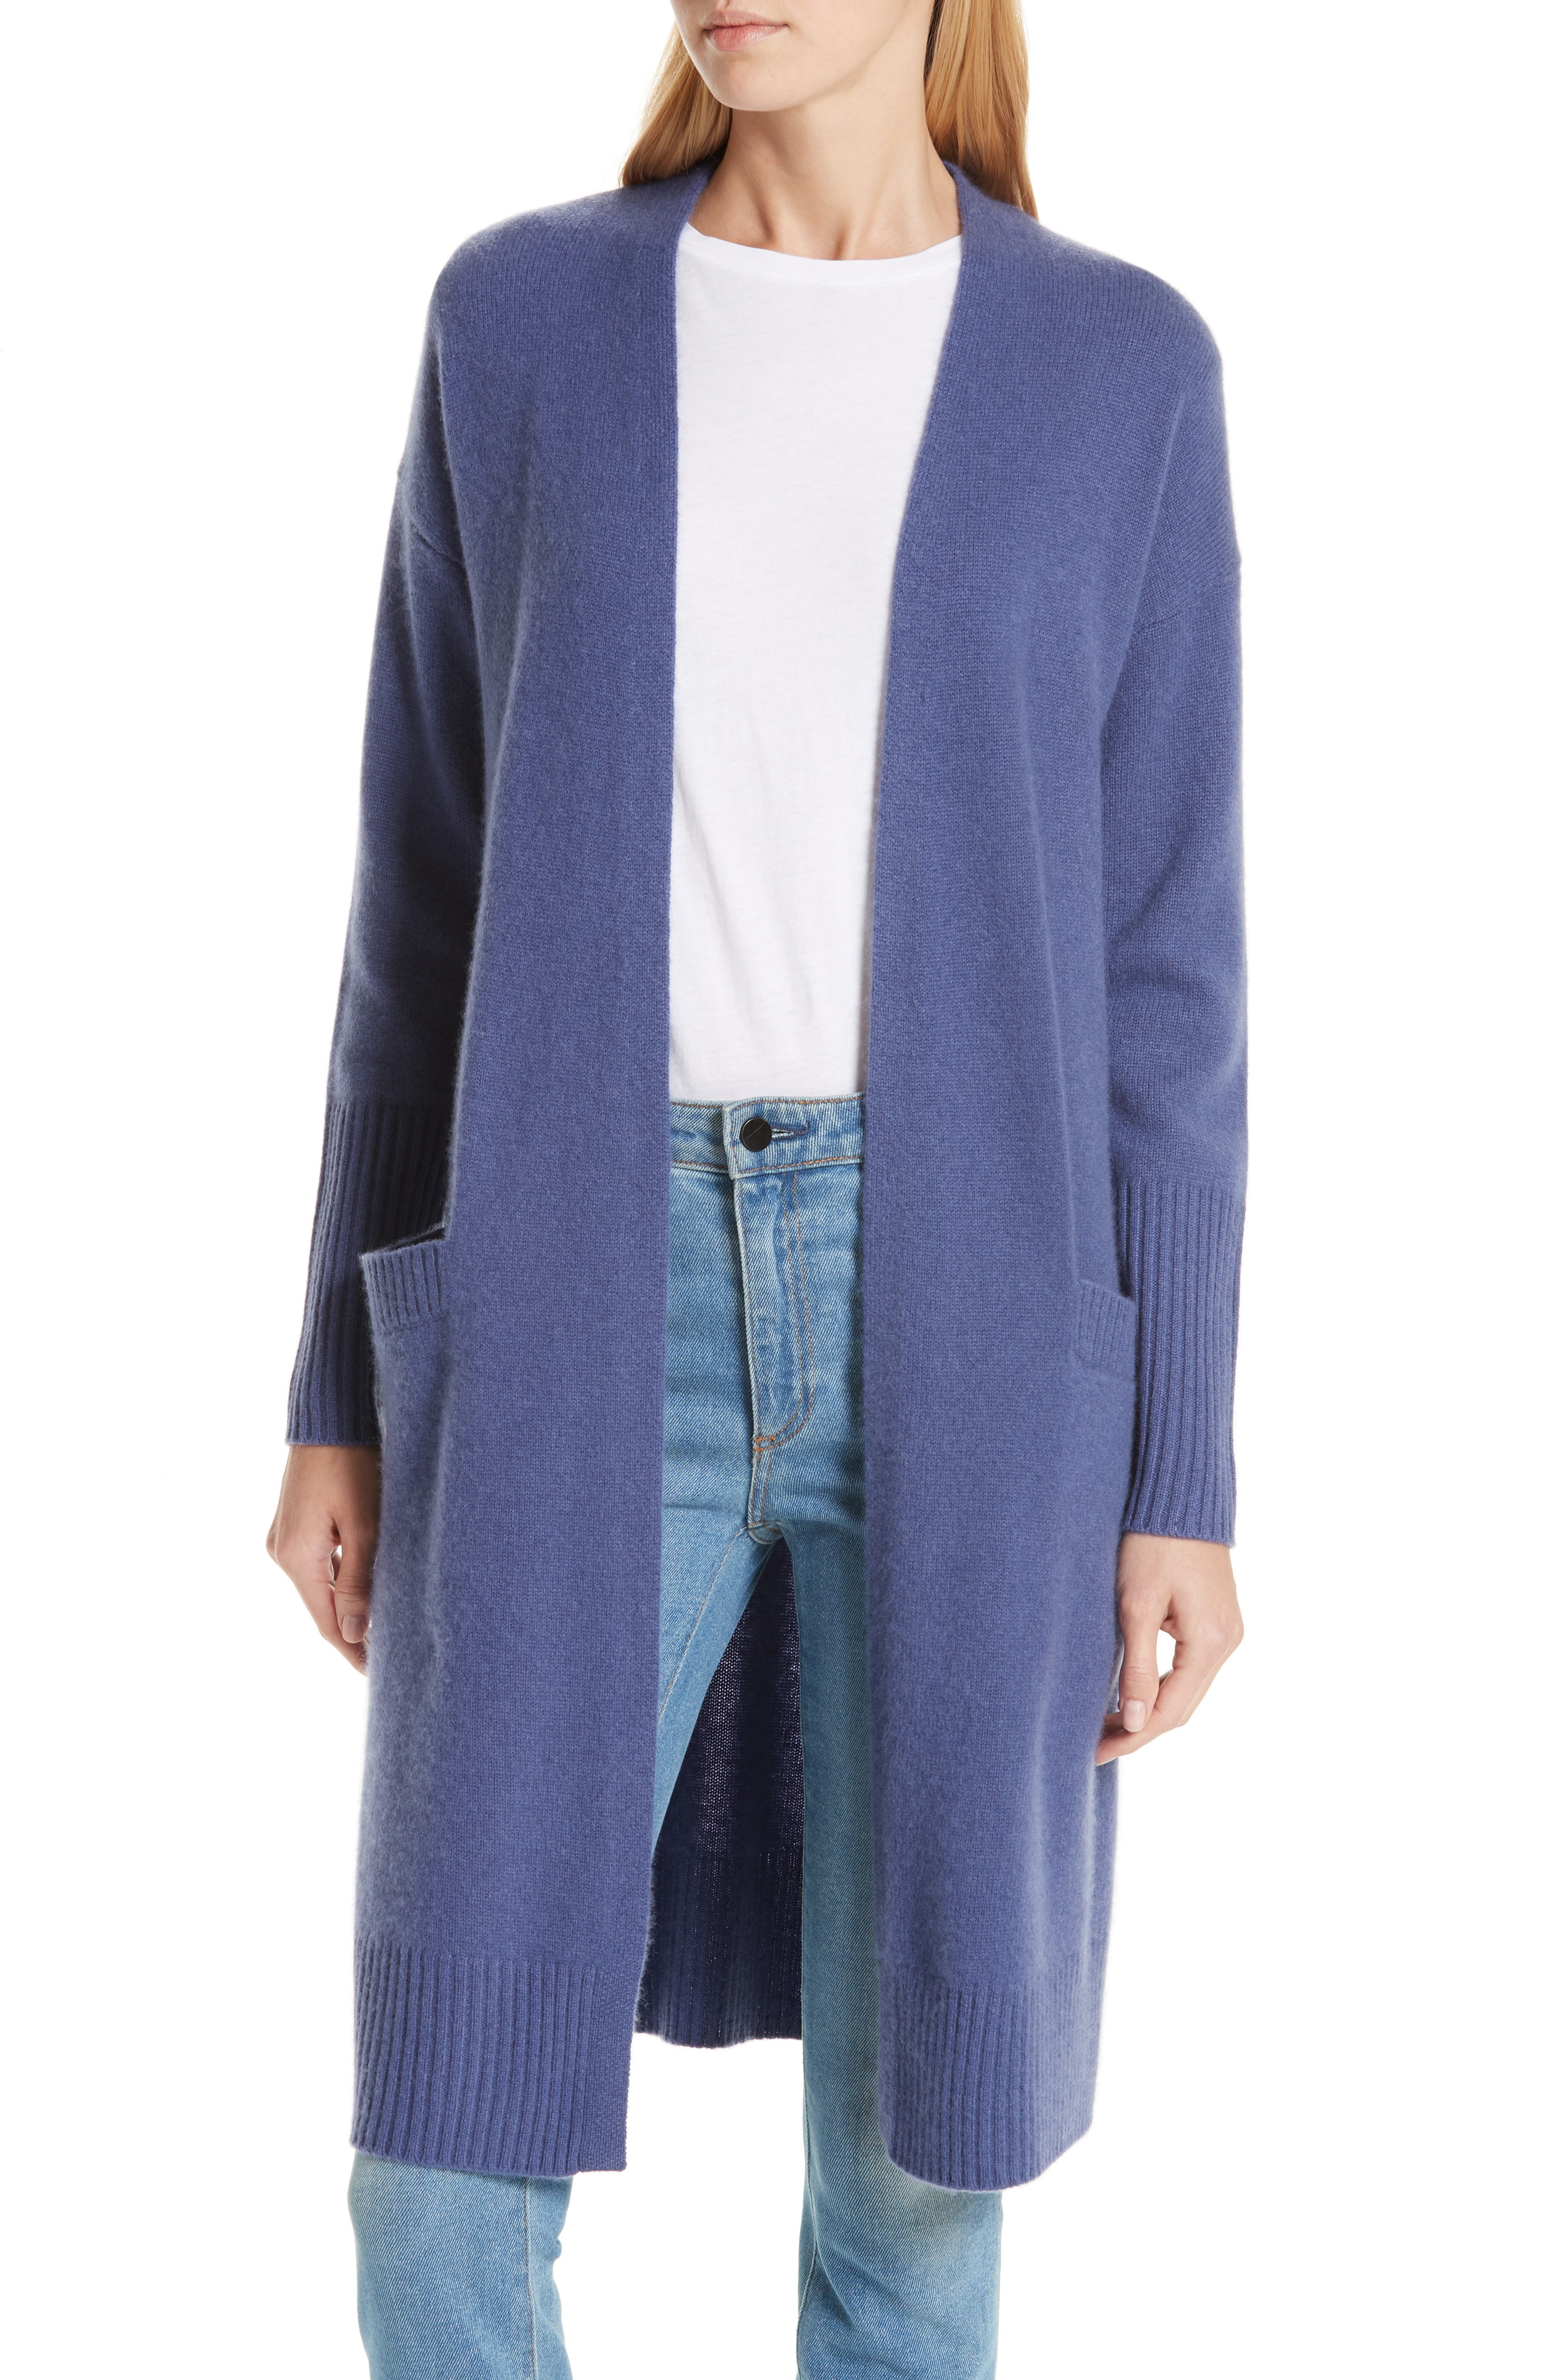 Nordstrom Signature Boiled Cashmere Open Cardigan